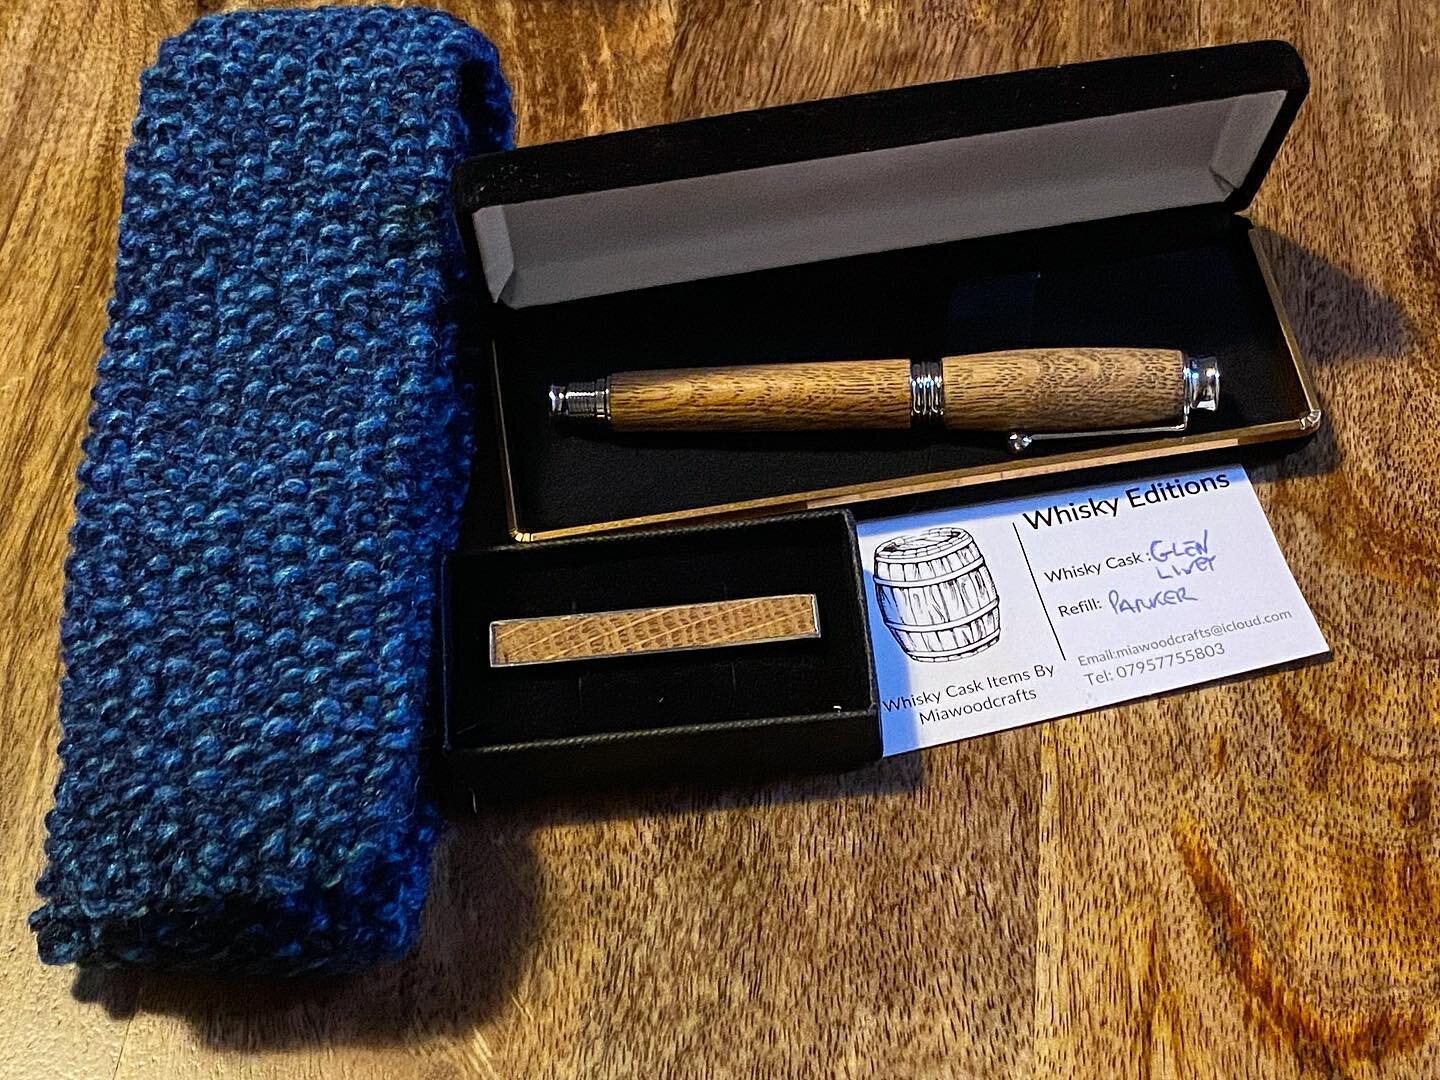 I got a lovely care package in the mail yesterday. A pen and matching tie clip made from a @theglenlivet Scotch barrel made by the talented @miawoodcrafts @whiskyeditions as well as a beautiful knit tie from his lovely wife @ribandpurl This gift came